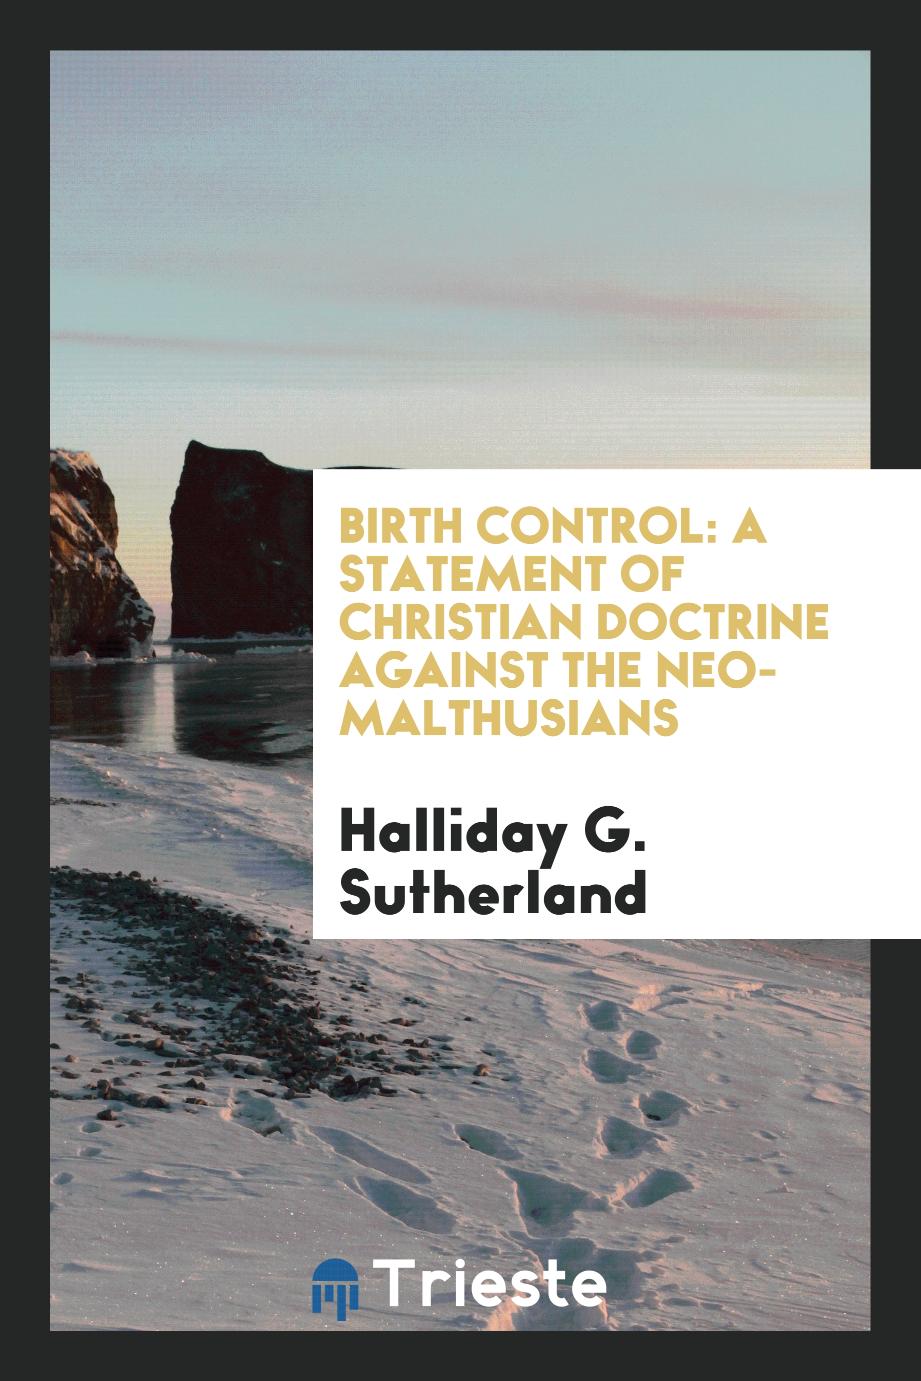 Birth Control: A Statement of Christian Doctrine against the Neo-Malthusians